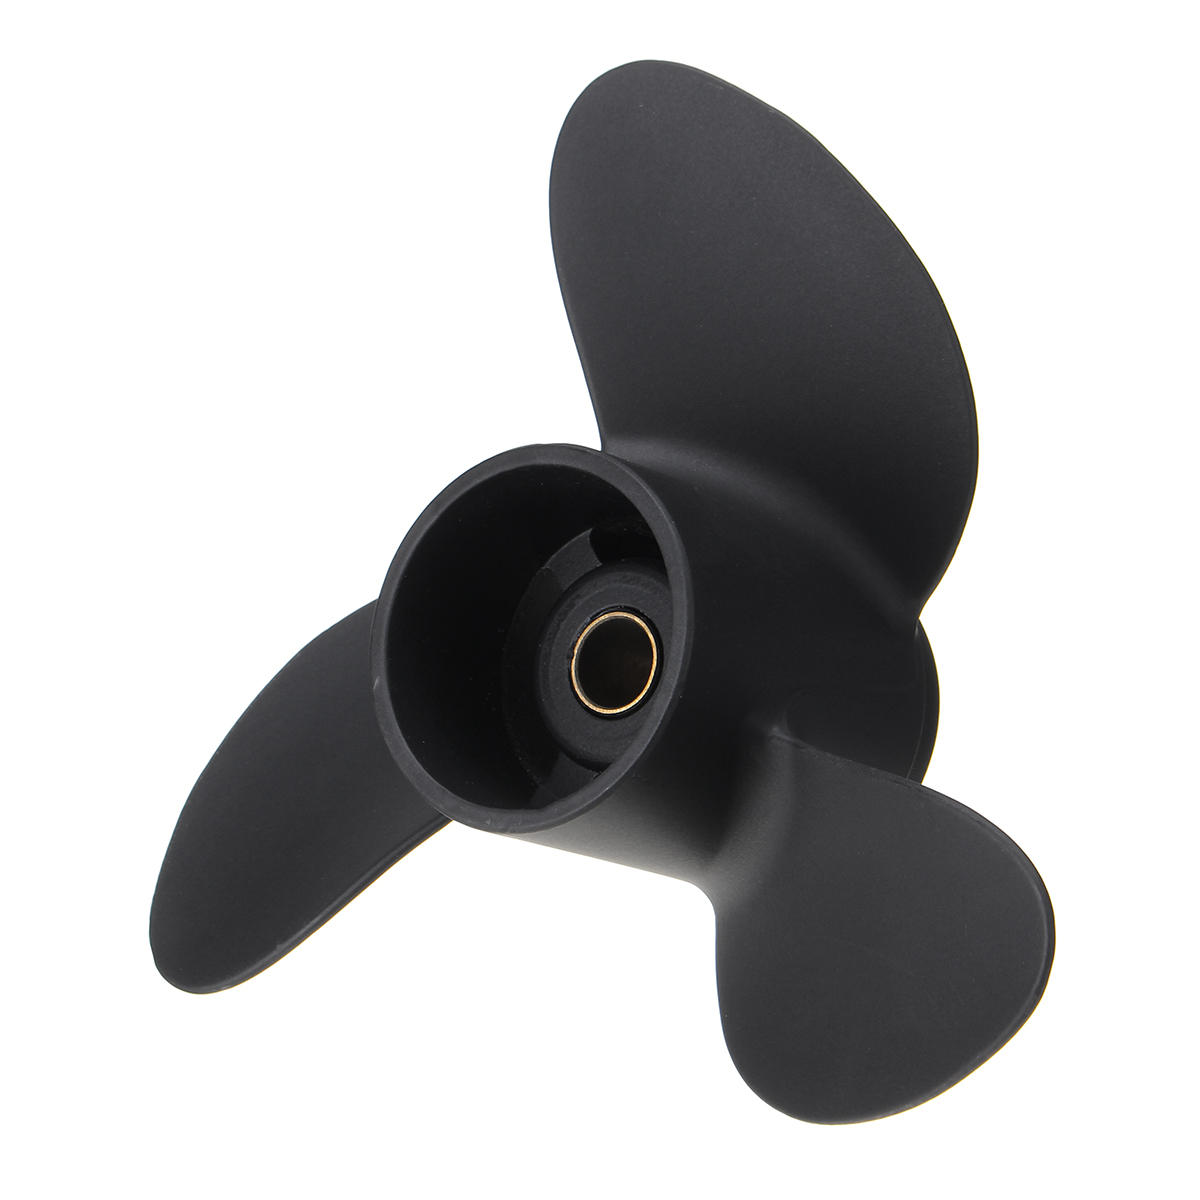 

7.8 x 7 Aluminum Outboard Propeller For Tohatsu Nissan Mercury 4HP 5HP 6HP 3R1B645141 / 48-812949A02